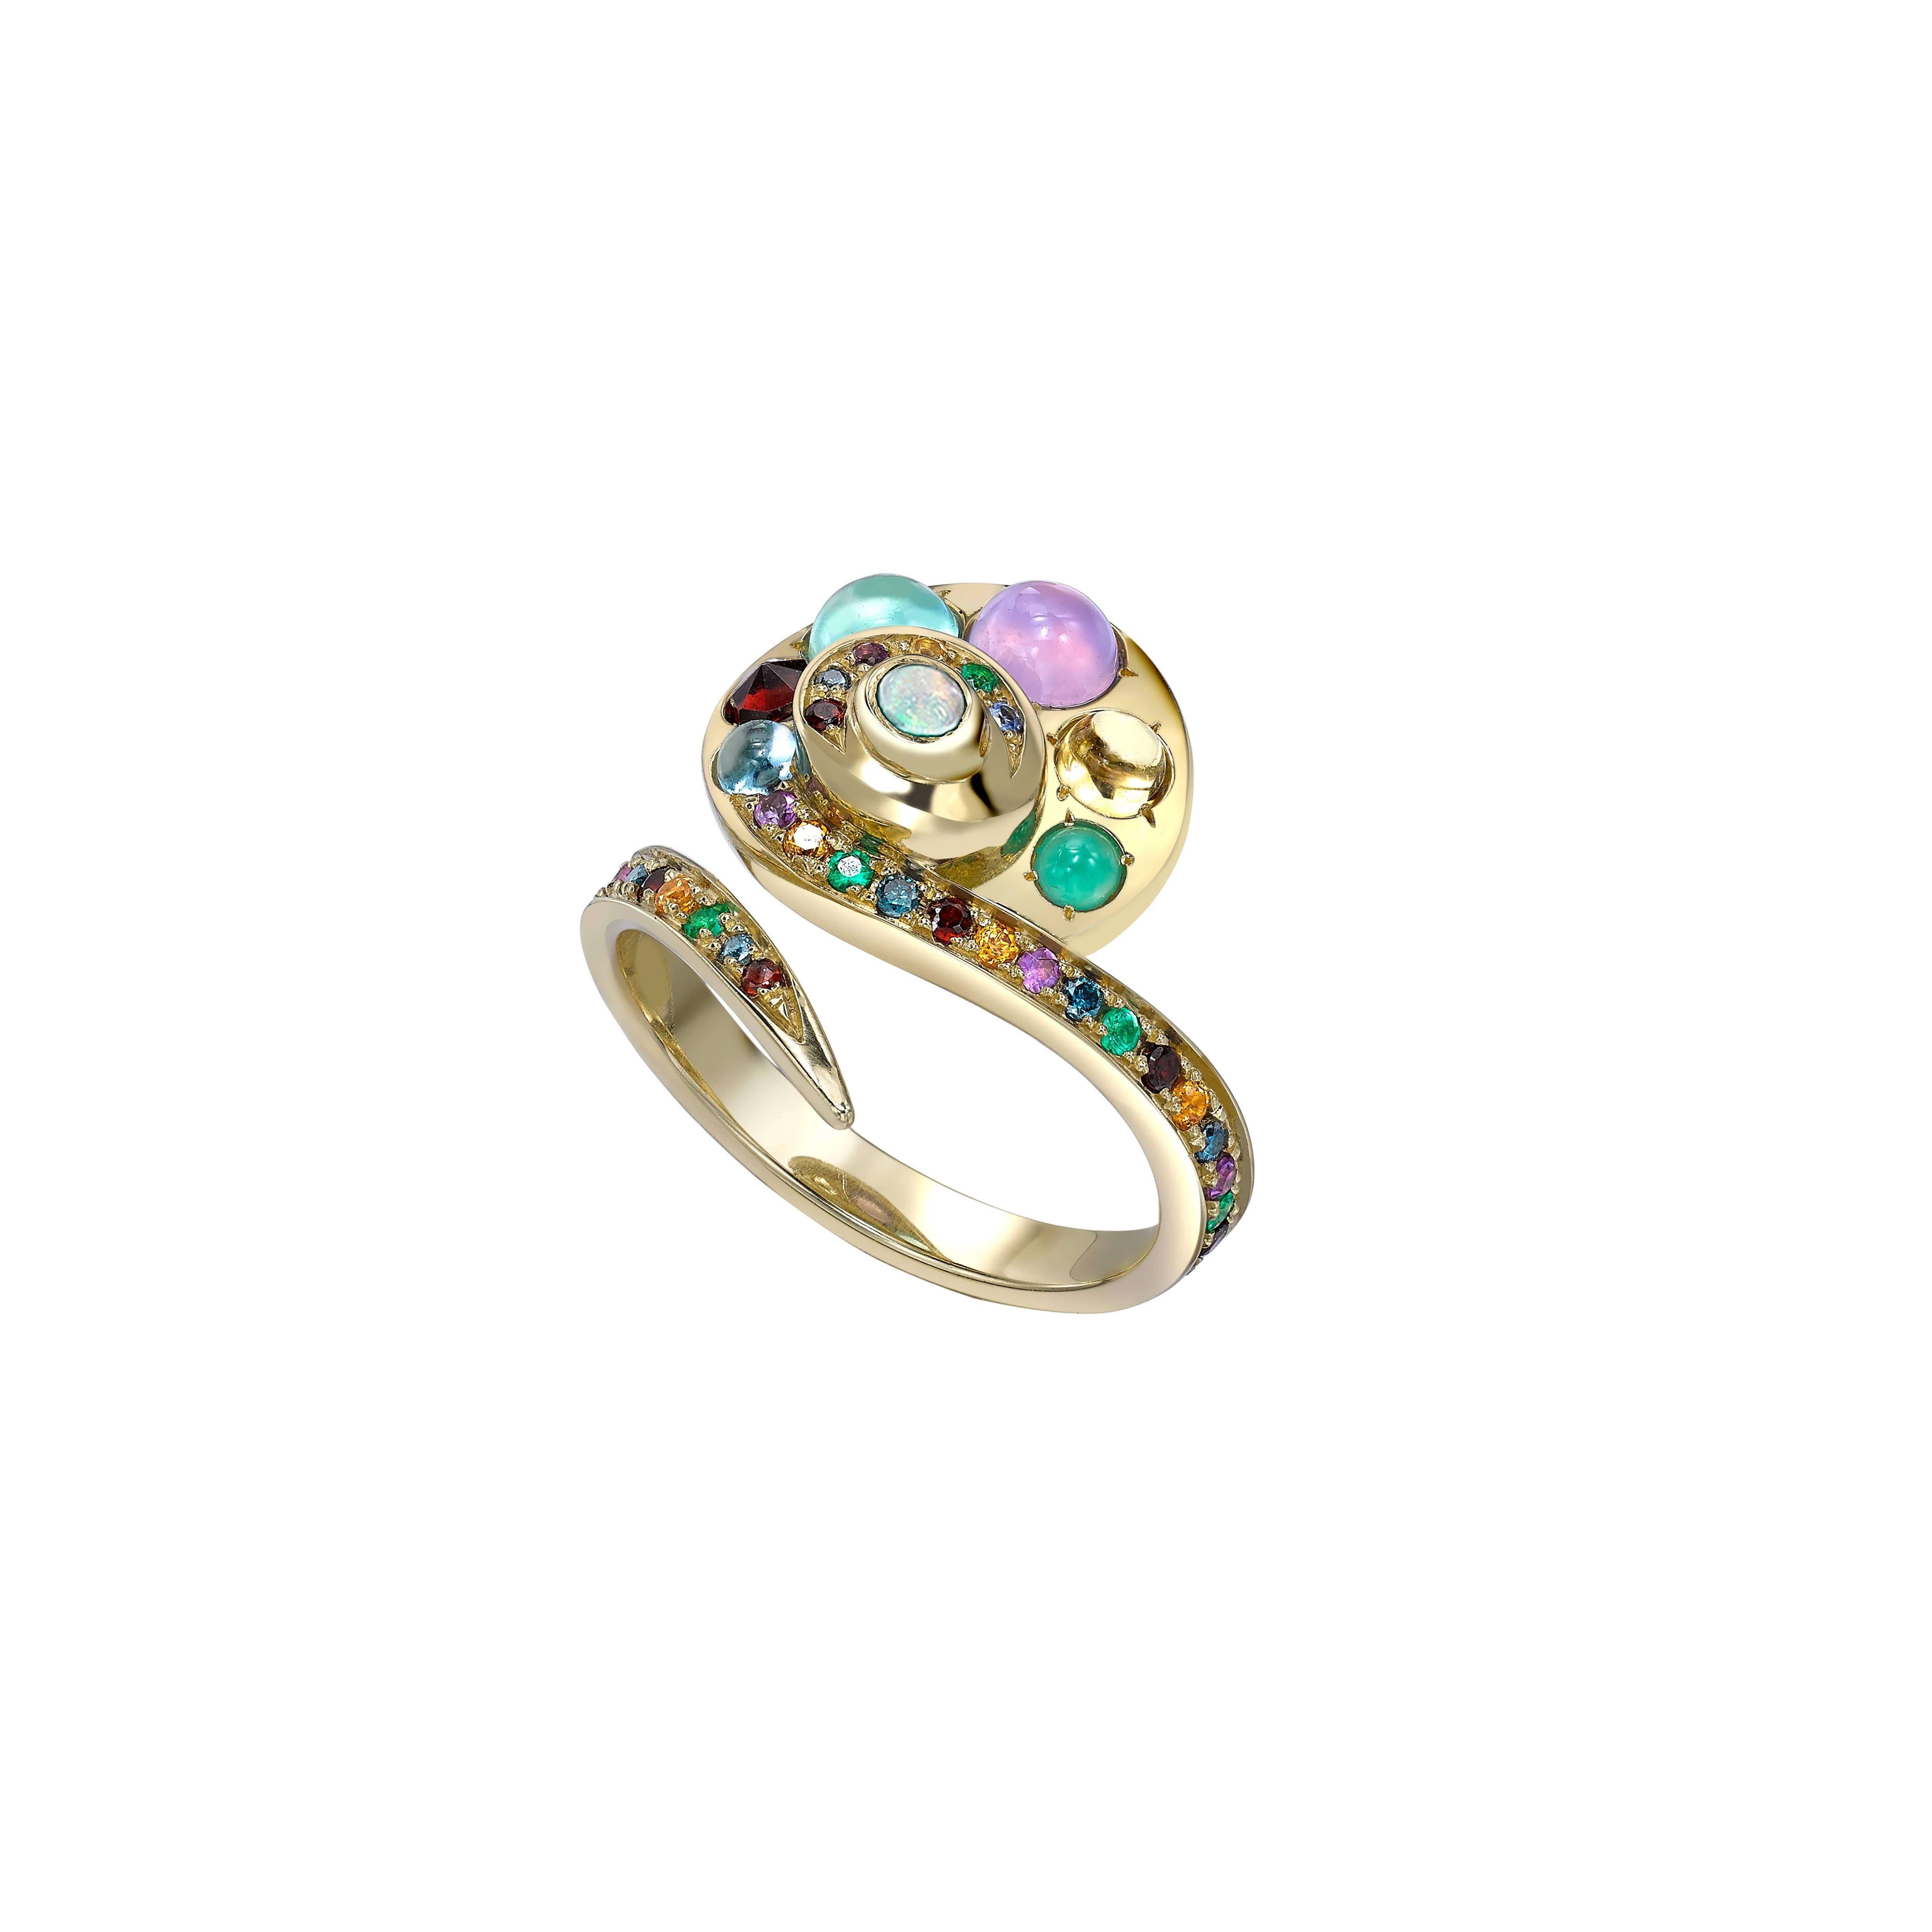 Ring sizes available: 49 and 52
Alternative sizes available on a made to order basis, with an estimated delivery time of 4-6 weeks)

18k Yellow Gold approx. 5.30gr, 1 White Opal 0.05ct, 1 Chrysoprase 0.05ct, 11 Citrines 0.24ct, 11 Garnets 0.27ct, 2